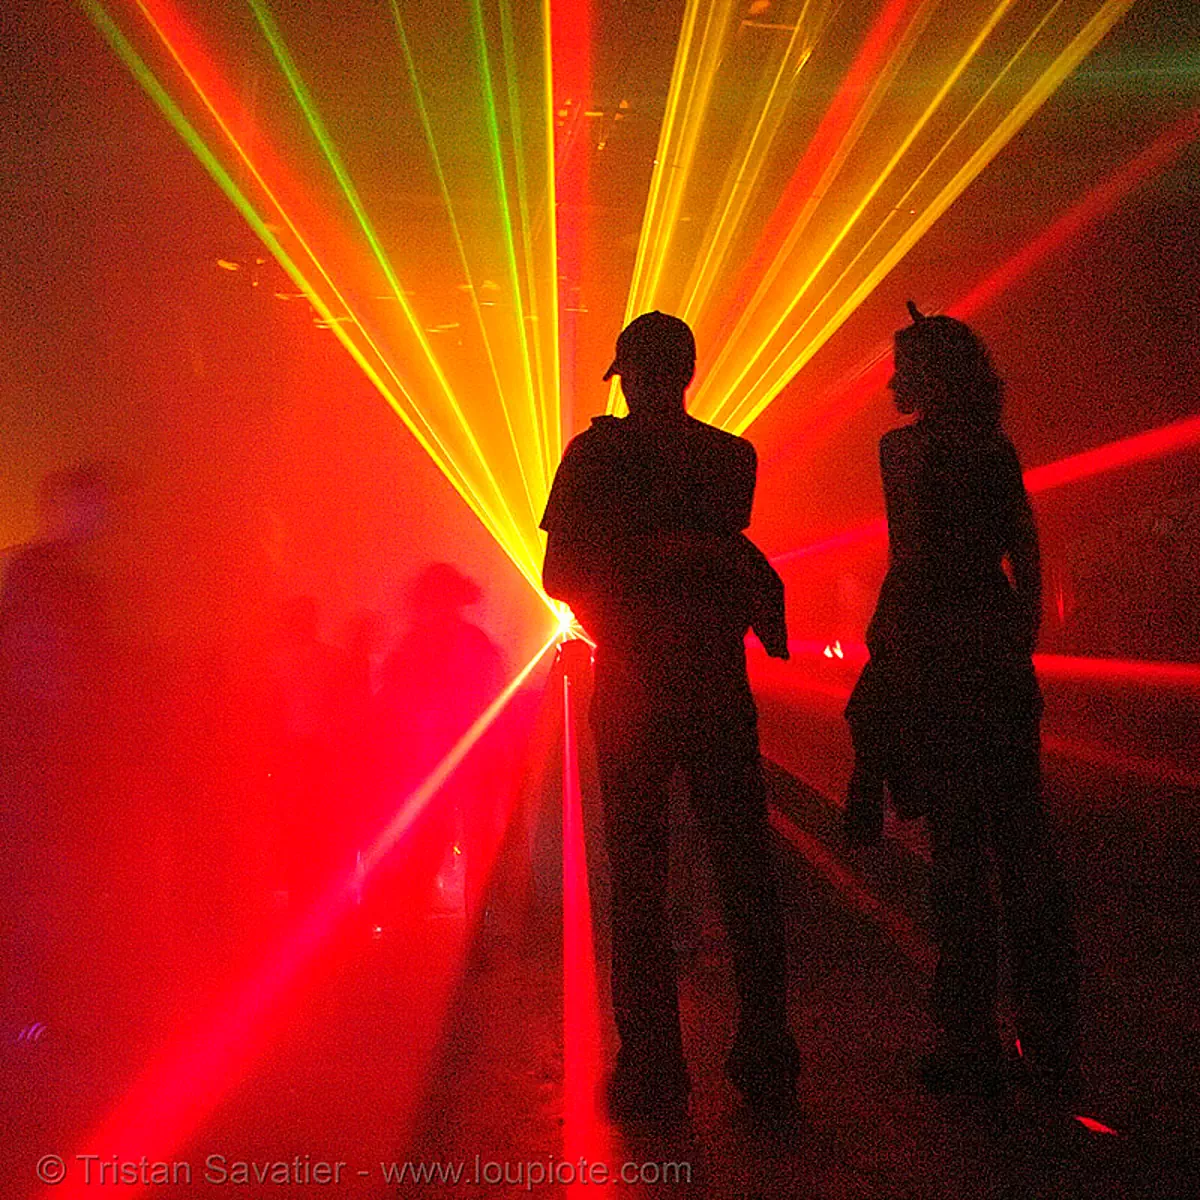 laser show - shadows in underground rave party, backlight, laser lightshow, laser show, lasers, nightclub, nightlife, rave lights, ravers, red, silhouettes